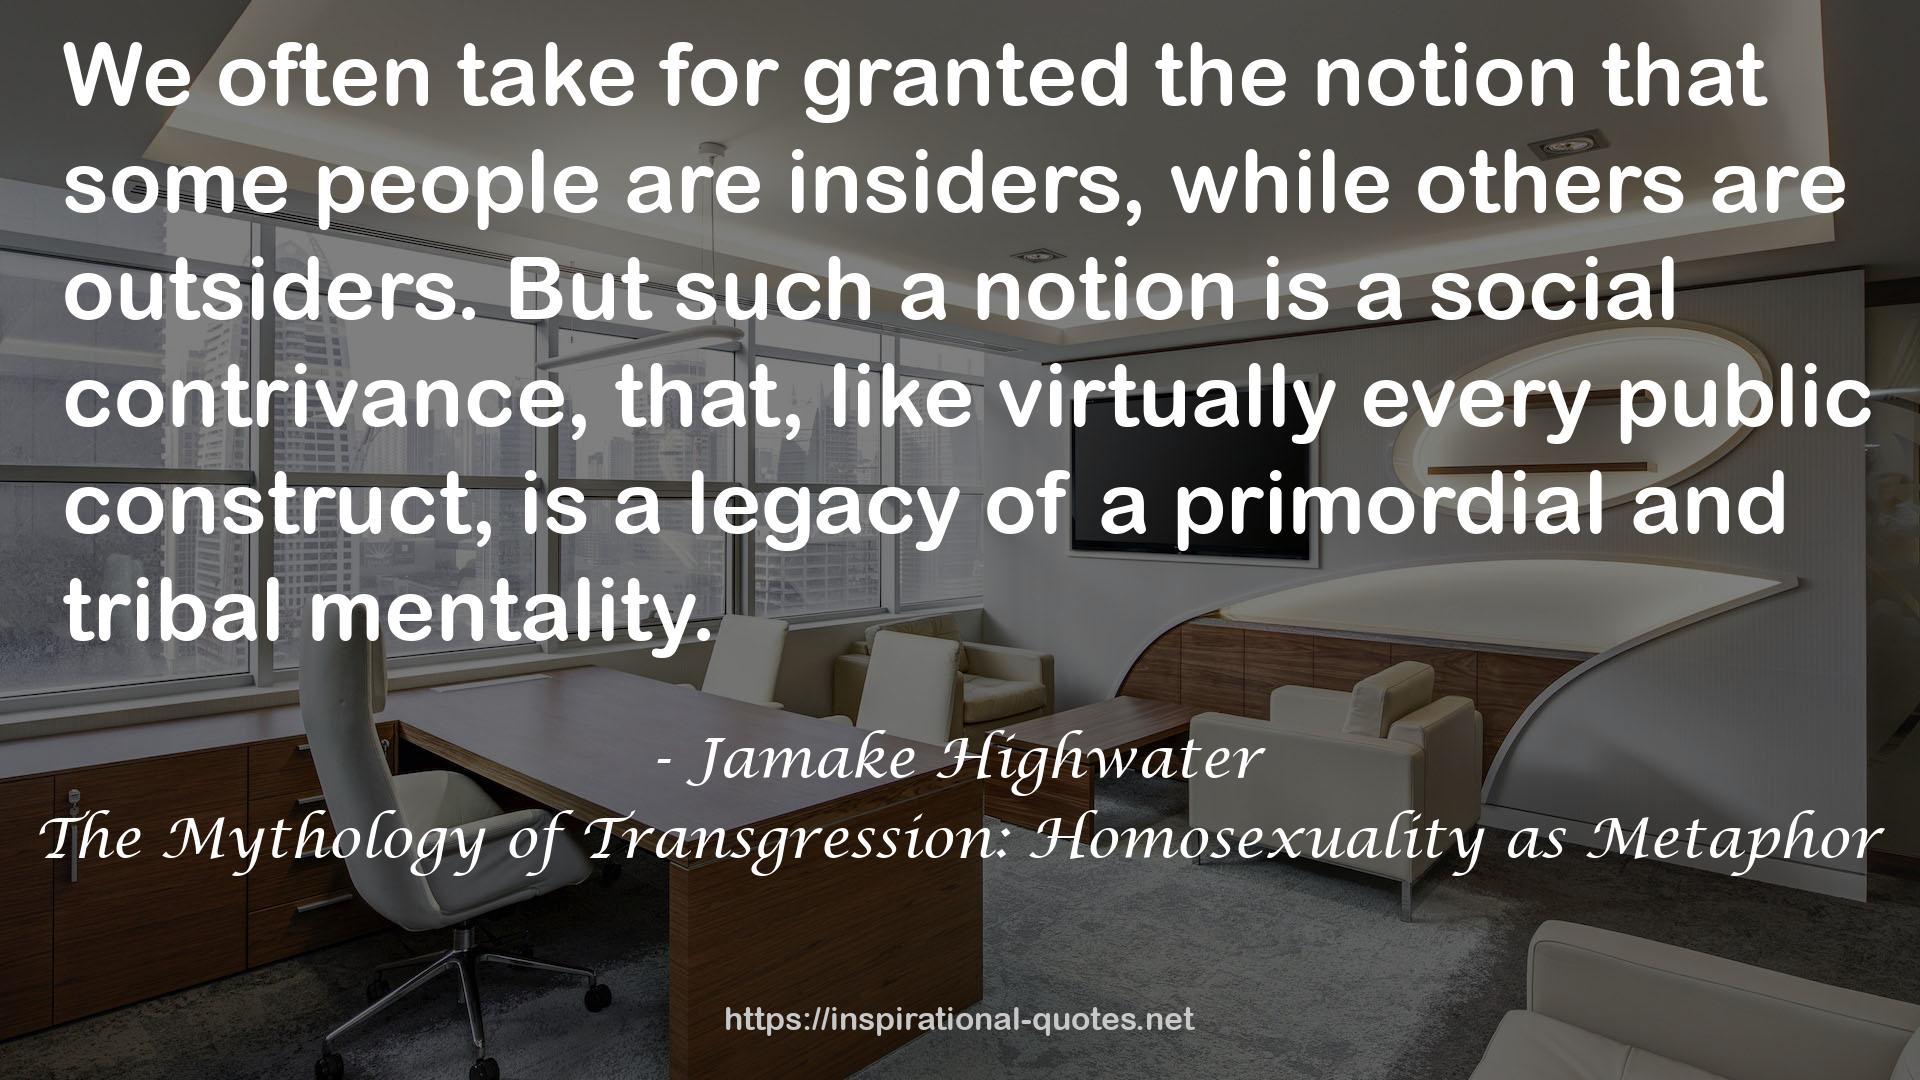 The Mythology of Transgression: Homosexuality as Metaphor QUOTES